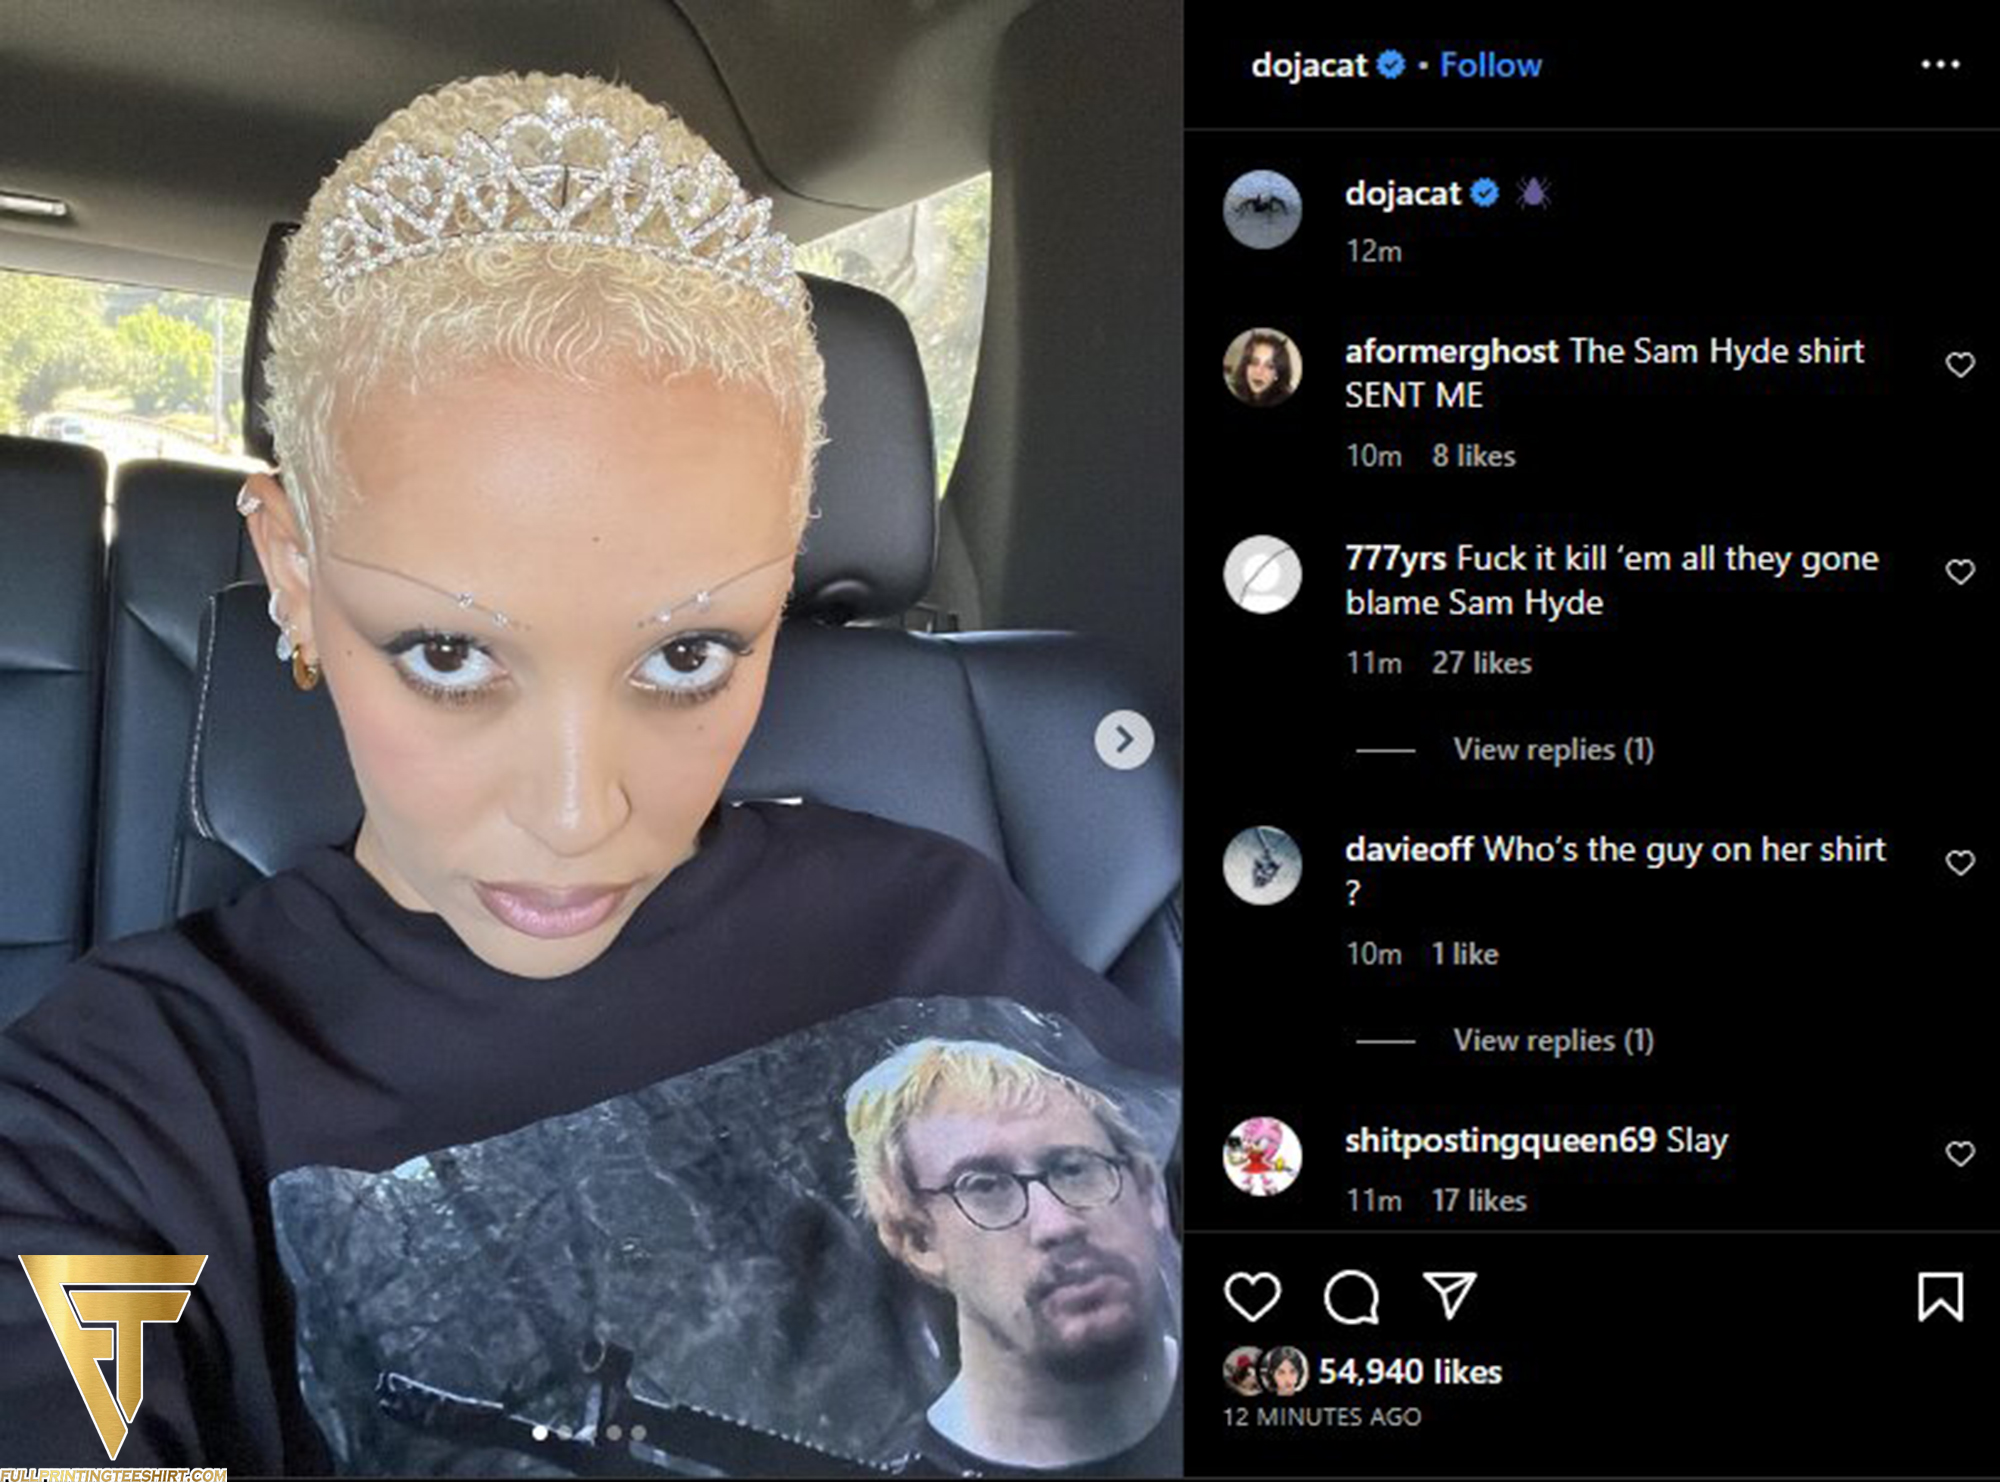 Doja Cat Rocks Internet with Bold Fashion Choice Spotted Wearing a Sam Hyde Shirt in New Photo